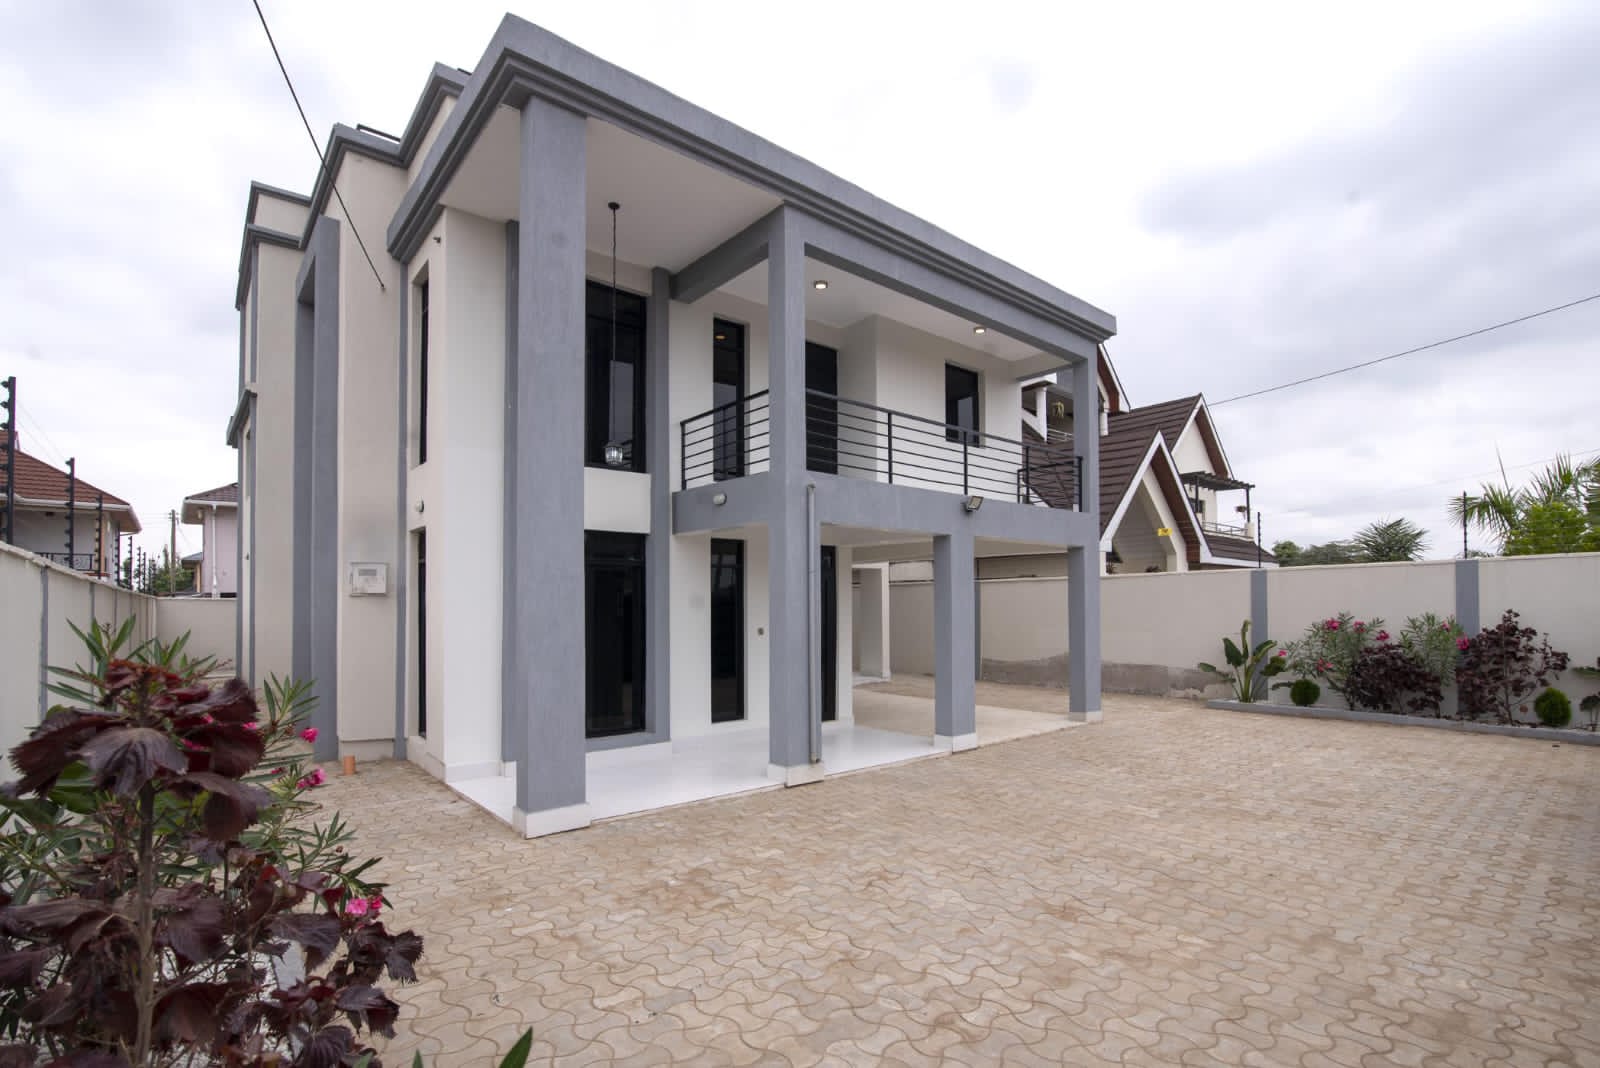 6bed + dsq for sale in Syokimau 35M. Sitted on 50×100 (1/8th Acre) Has Solar water heater, Electric fence, Automatic water pump, flat roof Musilli Homes